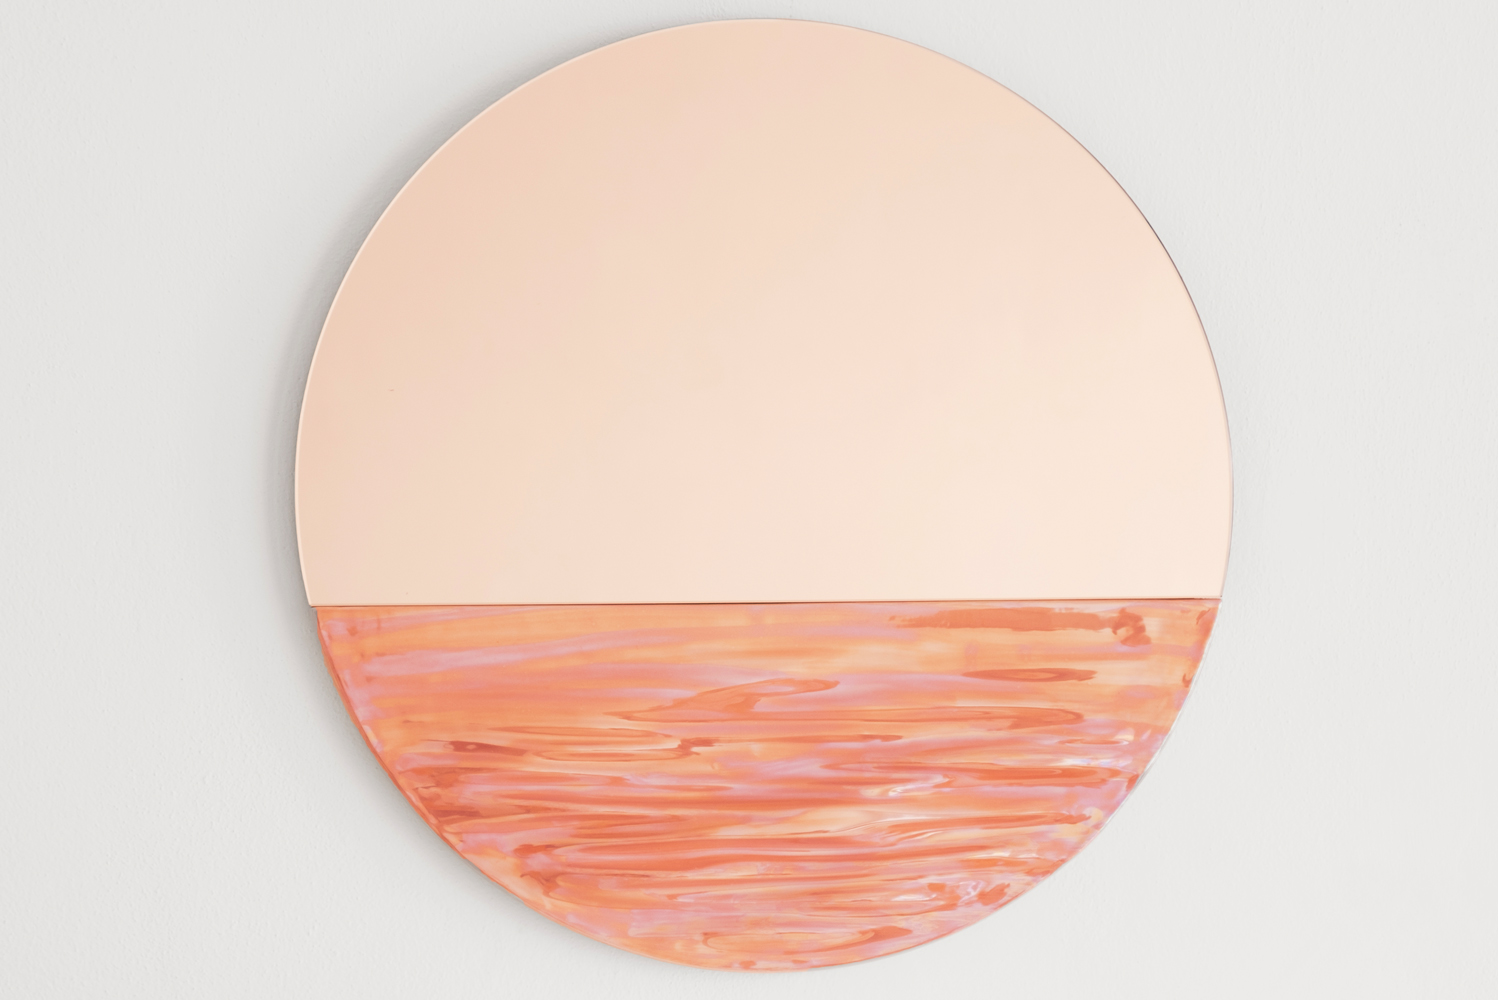 Ocrm introduced three colors - iridescent emerald green and coral pink - to its line of Orizon mirrors 